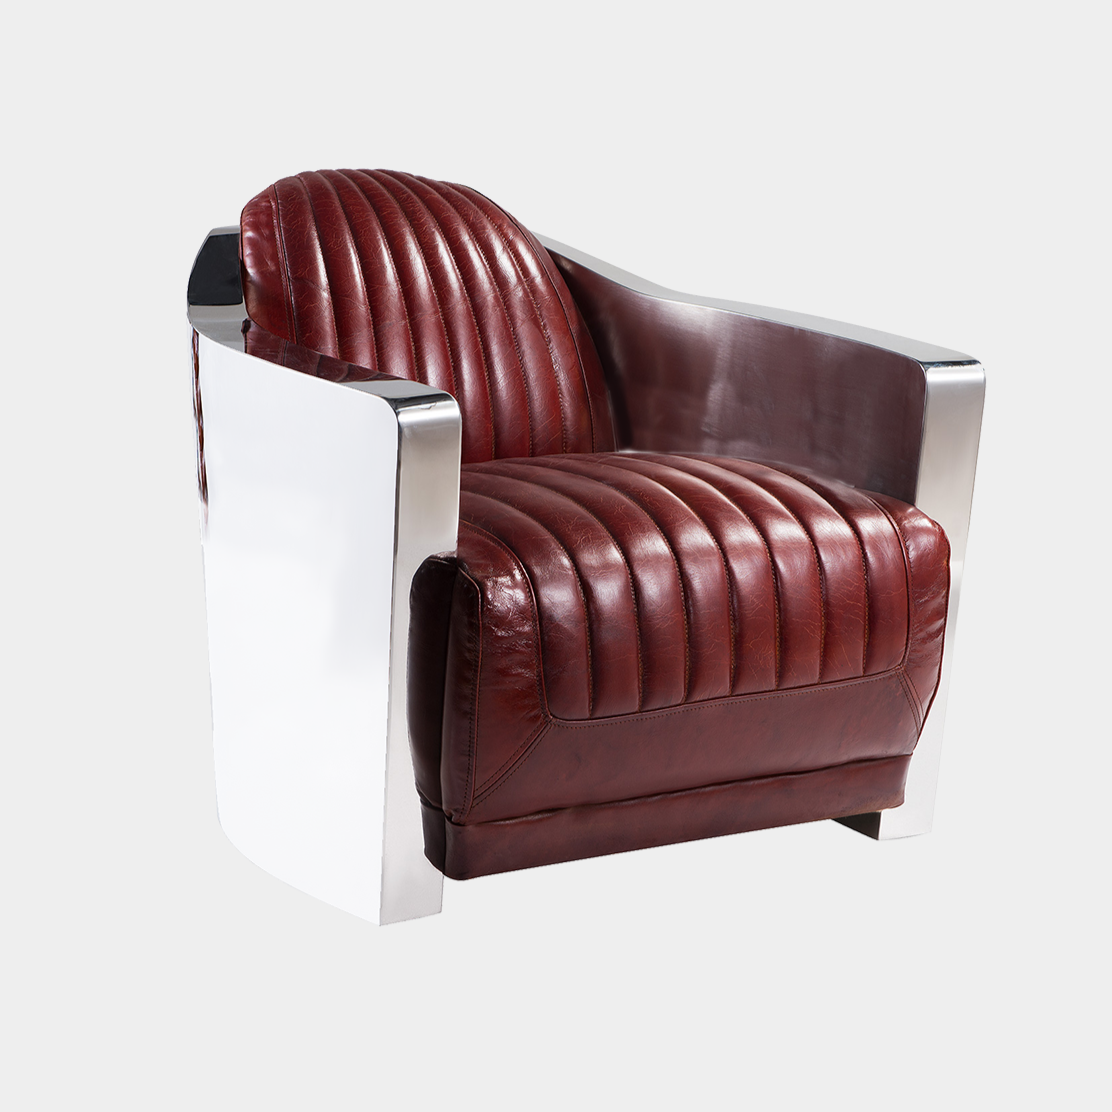 Hudson Arm Chair (Closed Arm)- Stainless steel & Brazilian leather